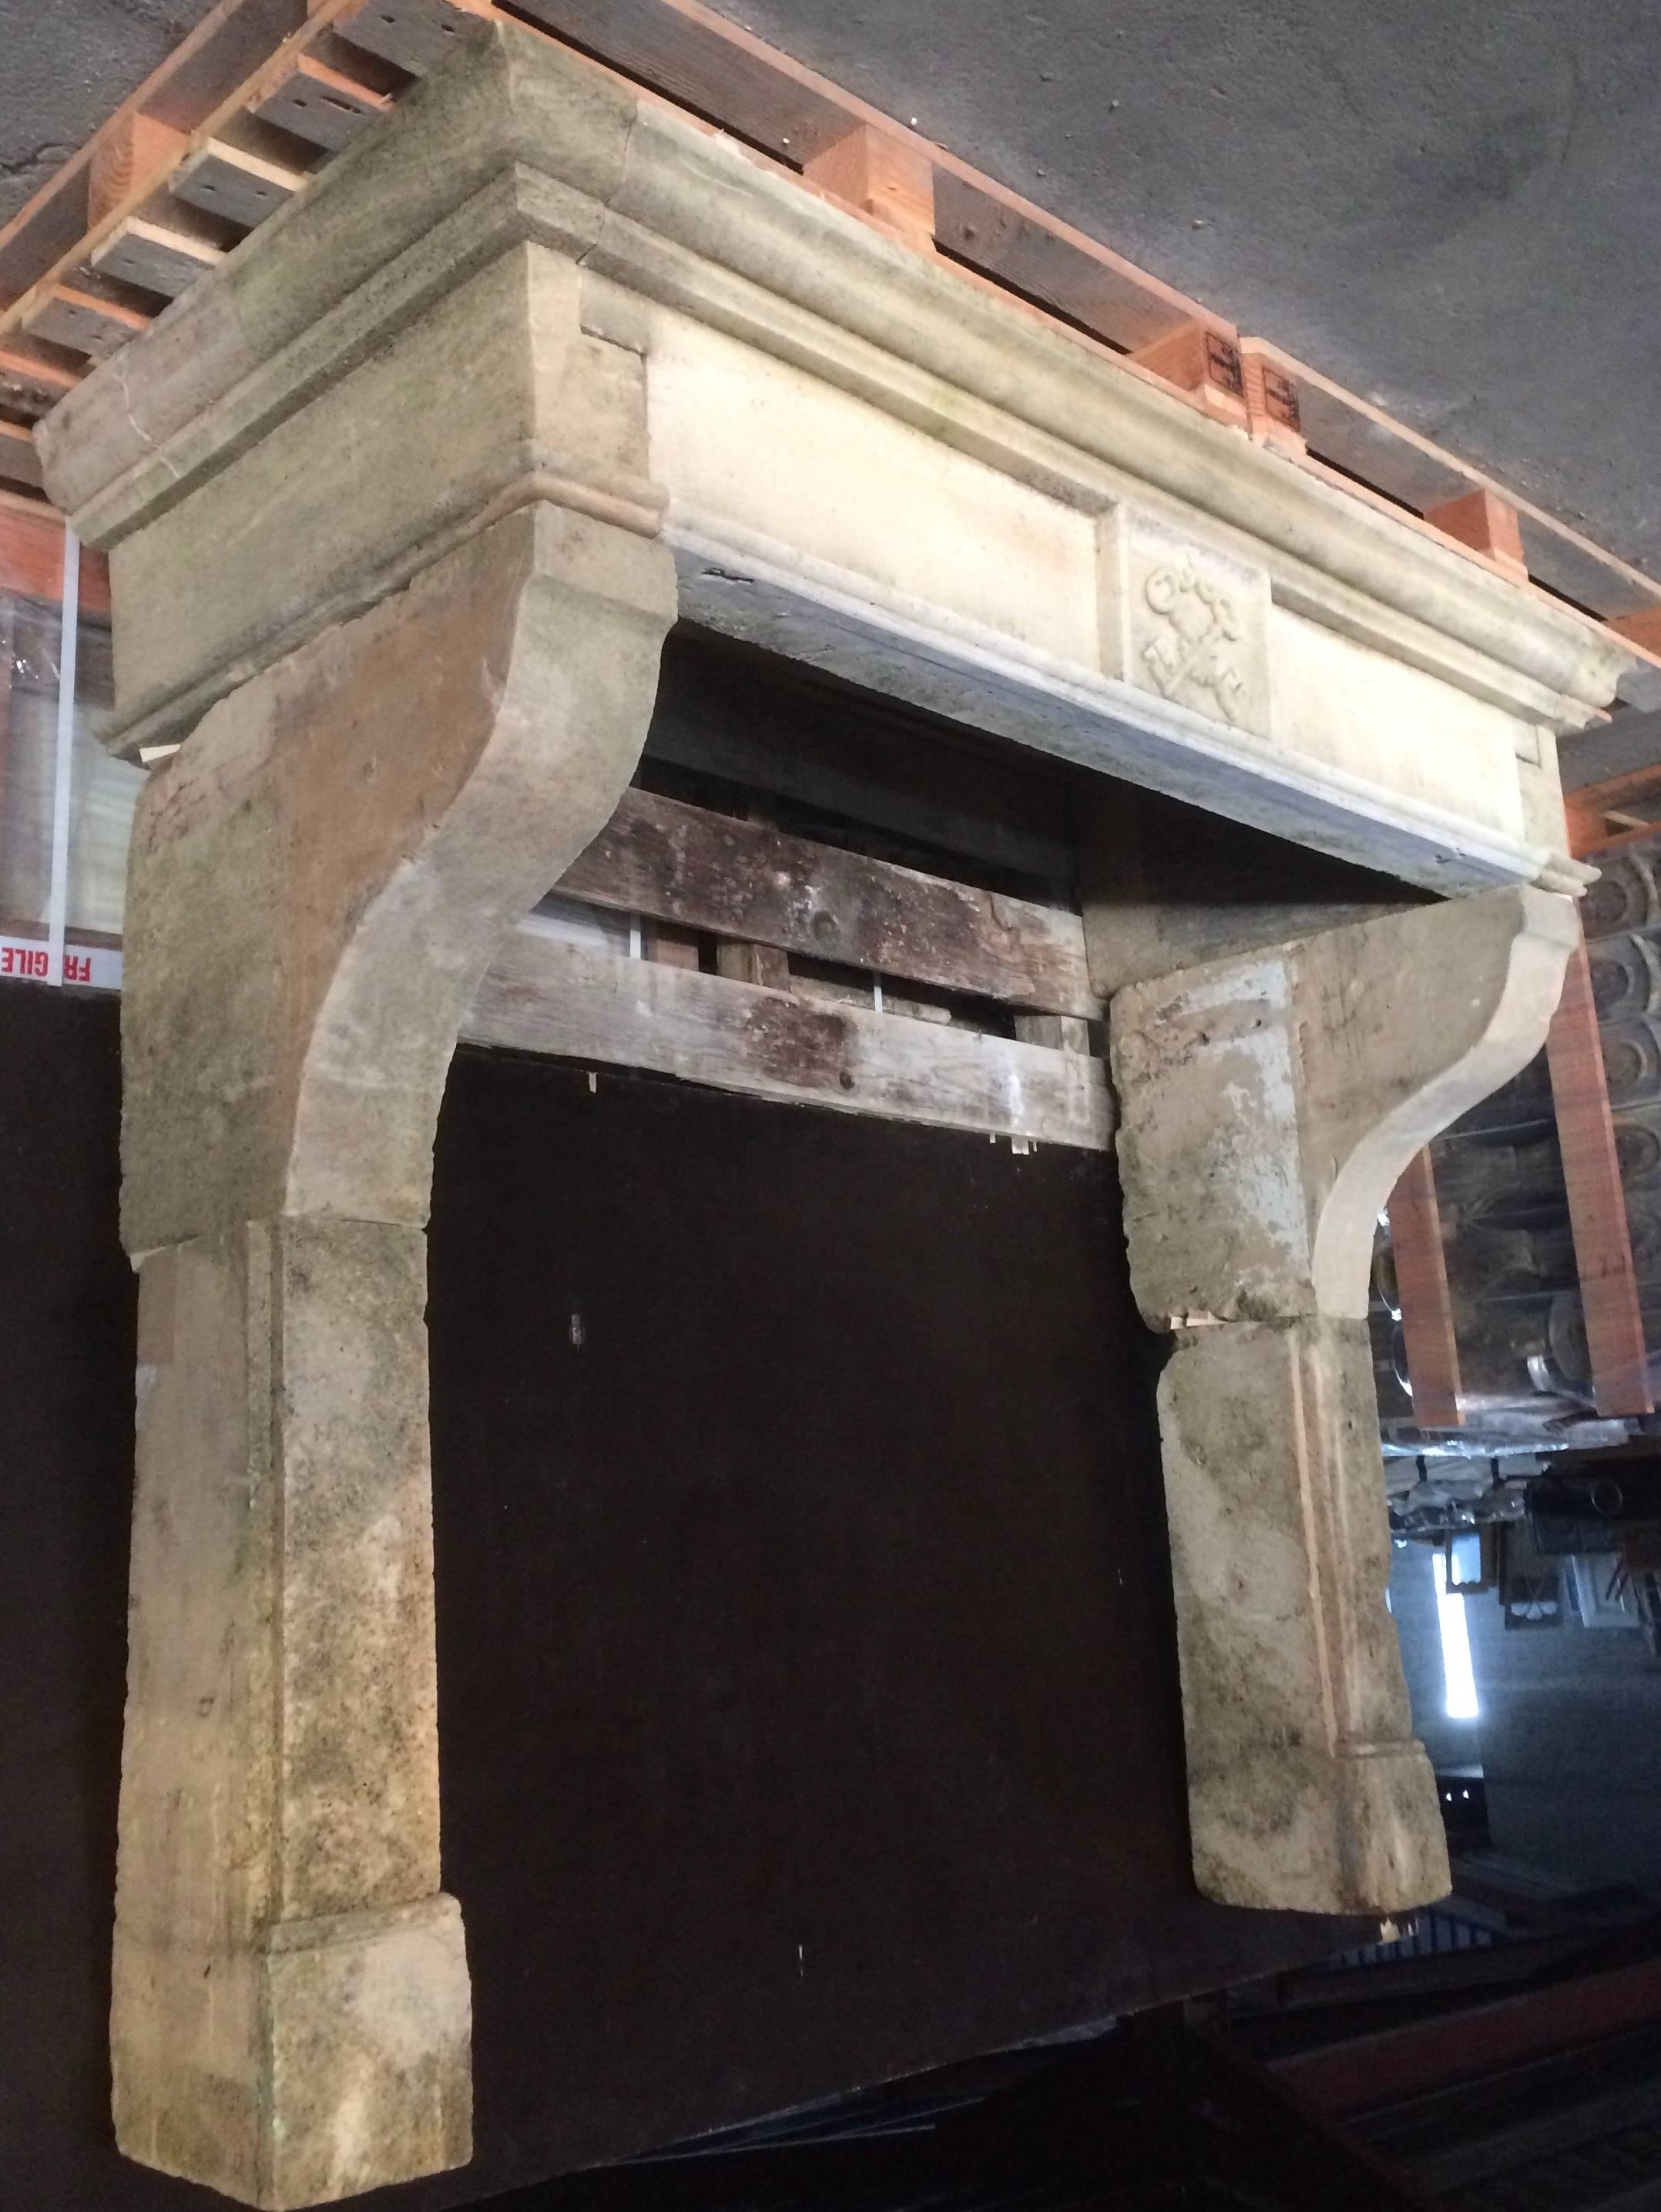 A French Louis XIII style fireplace handcrafted in pure French limestone.
This fireplace was originally hand-carved in the early 18th century, it is all in pure French antique limestone.
It has been restored and cleaned in the 20th century.
It is